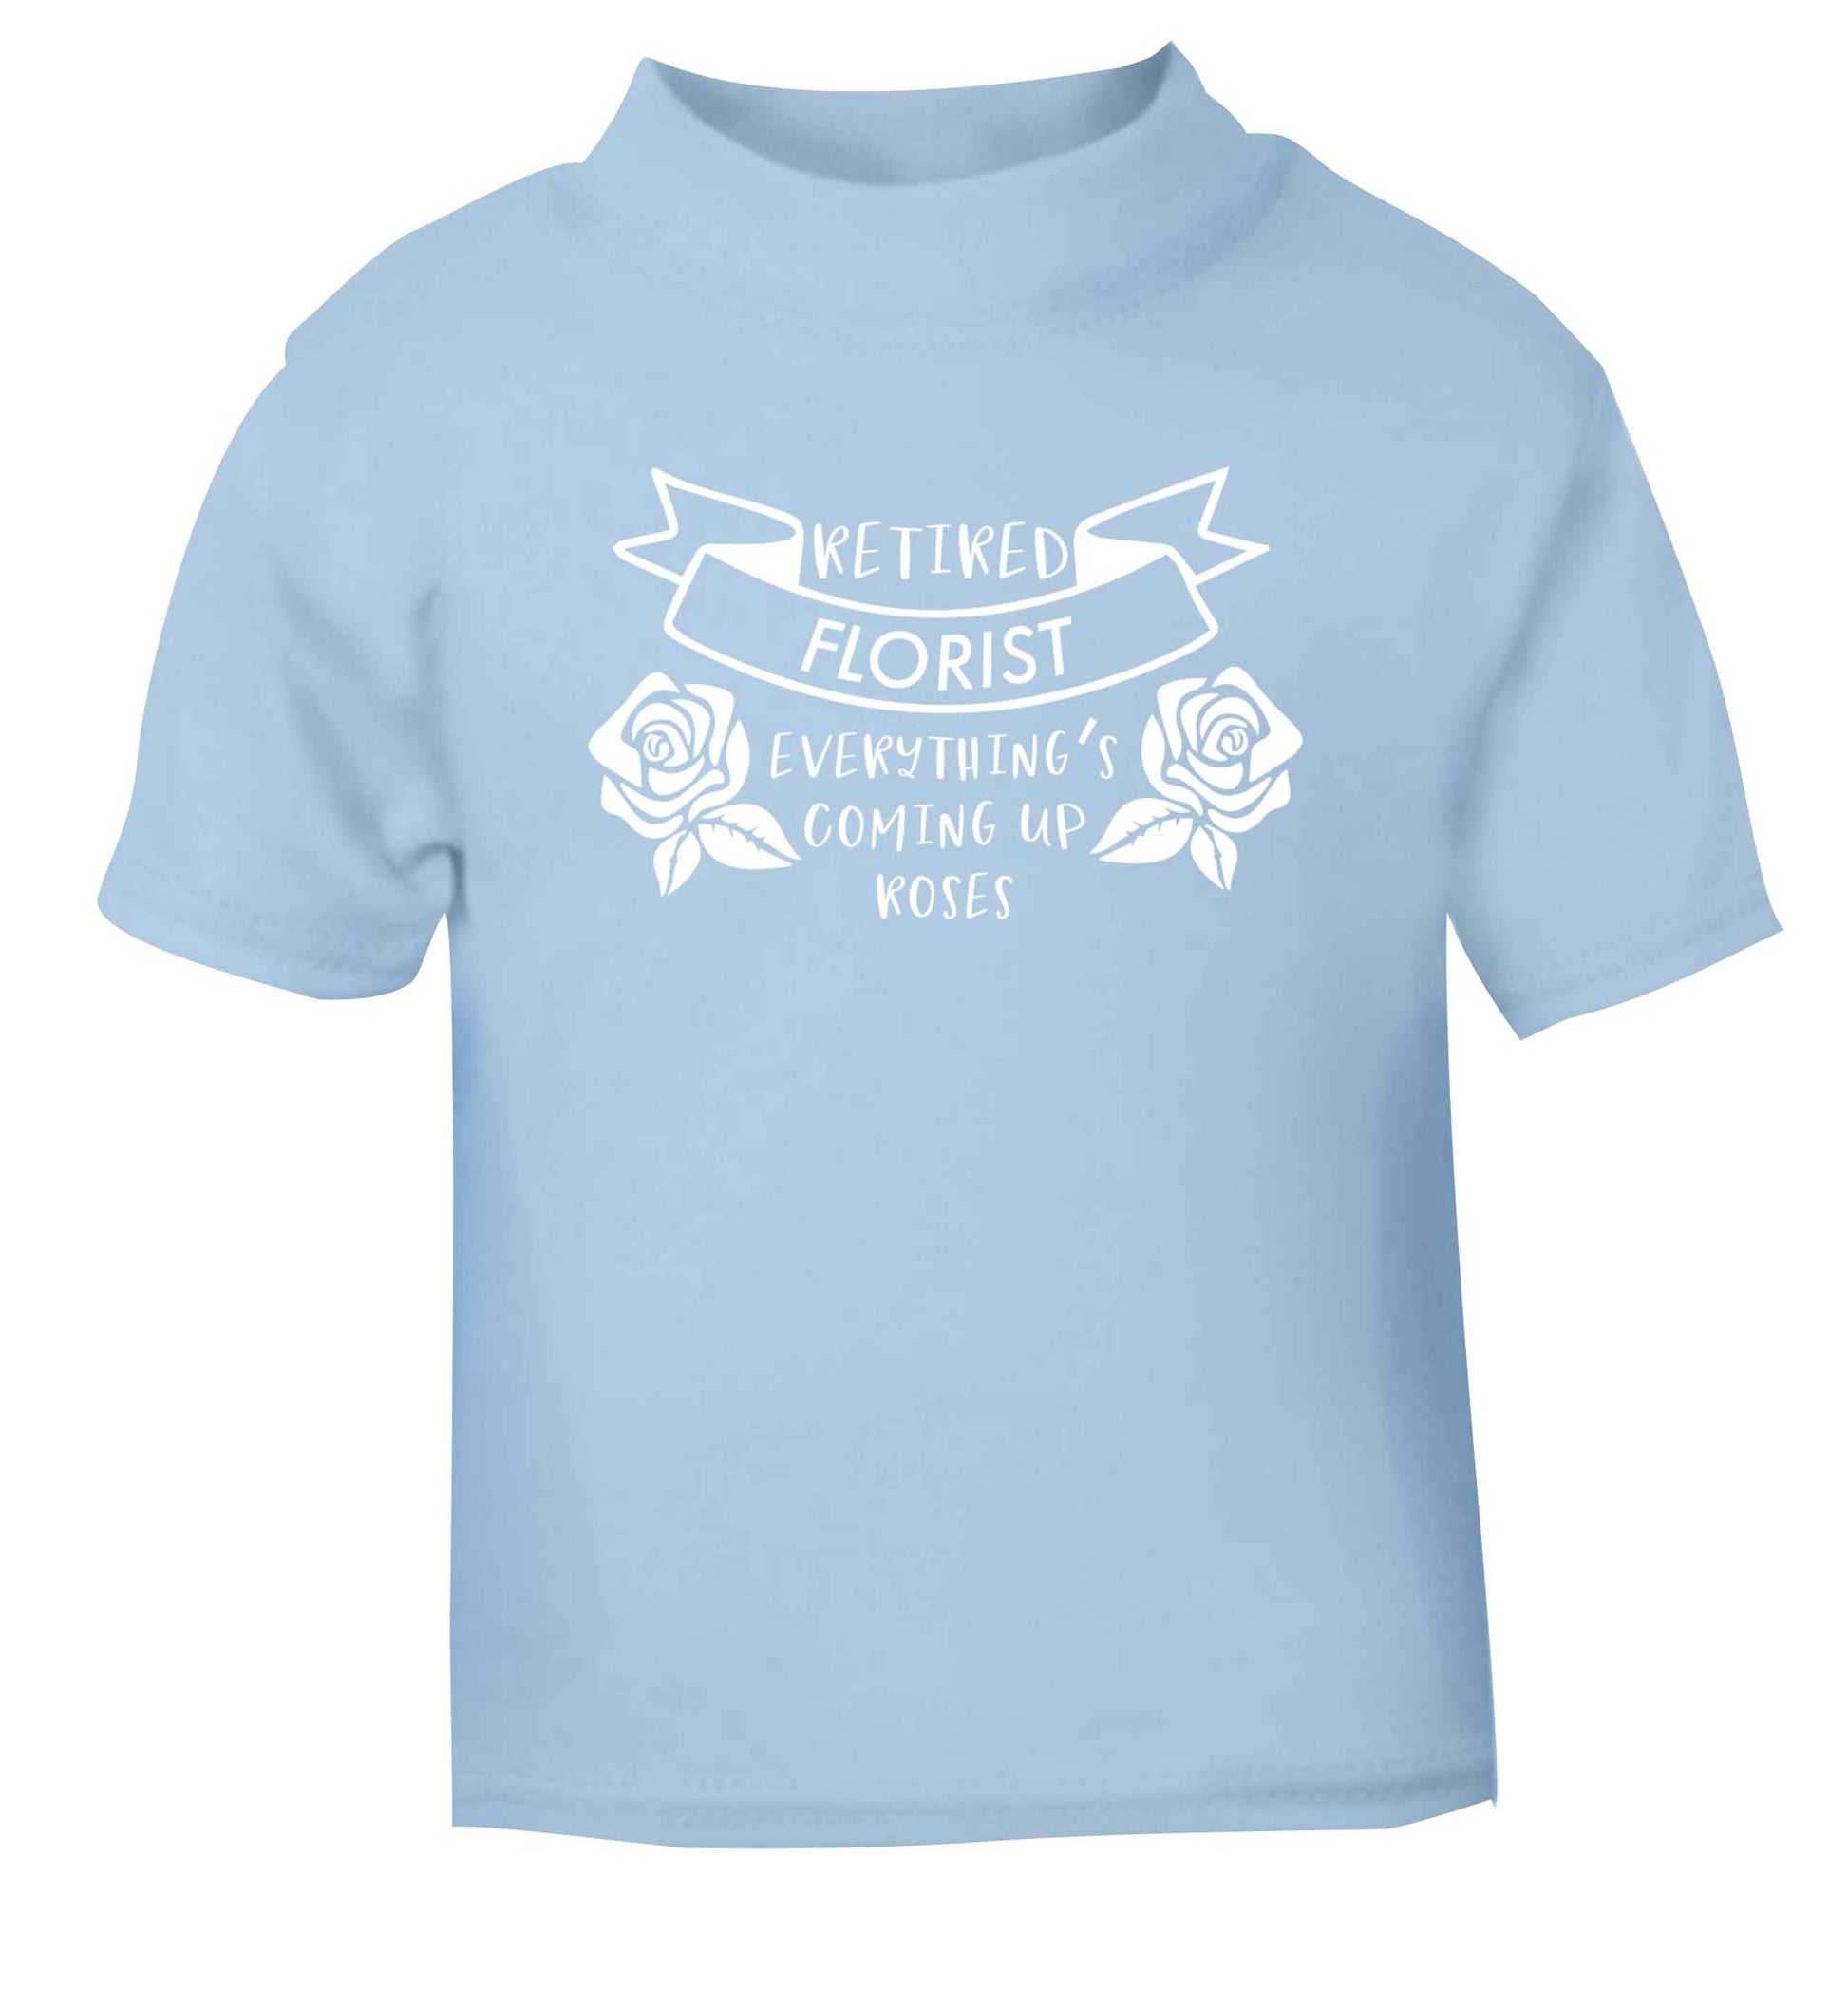 Retired florist everything's coming up roses light blue Baby Toddler Tshirt 2 Years